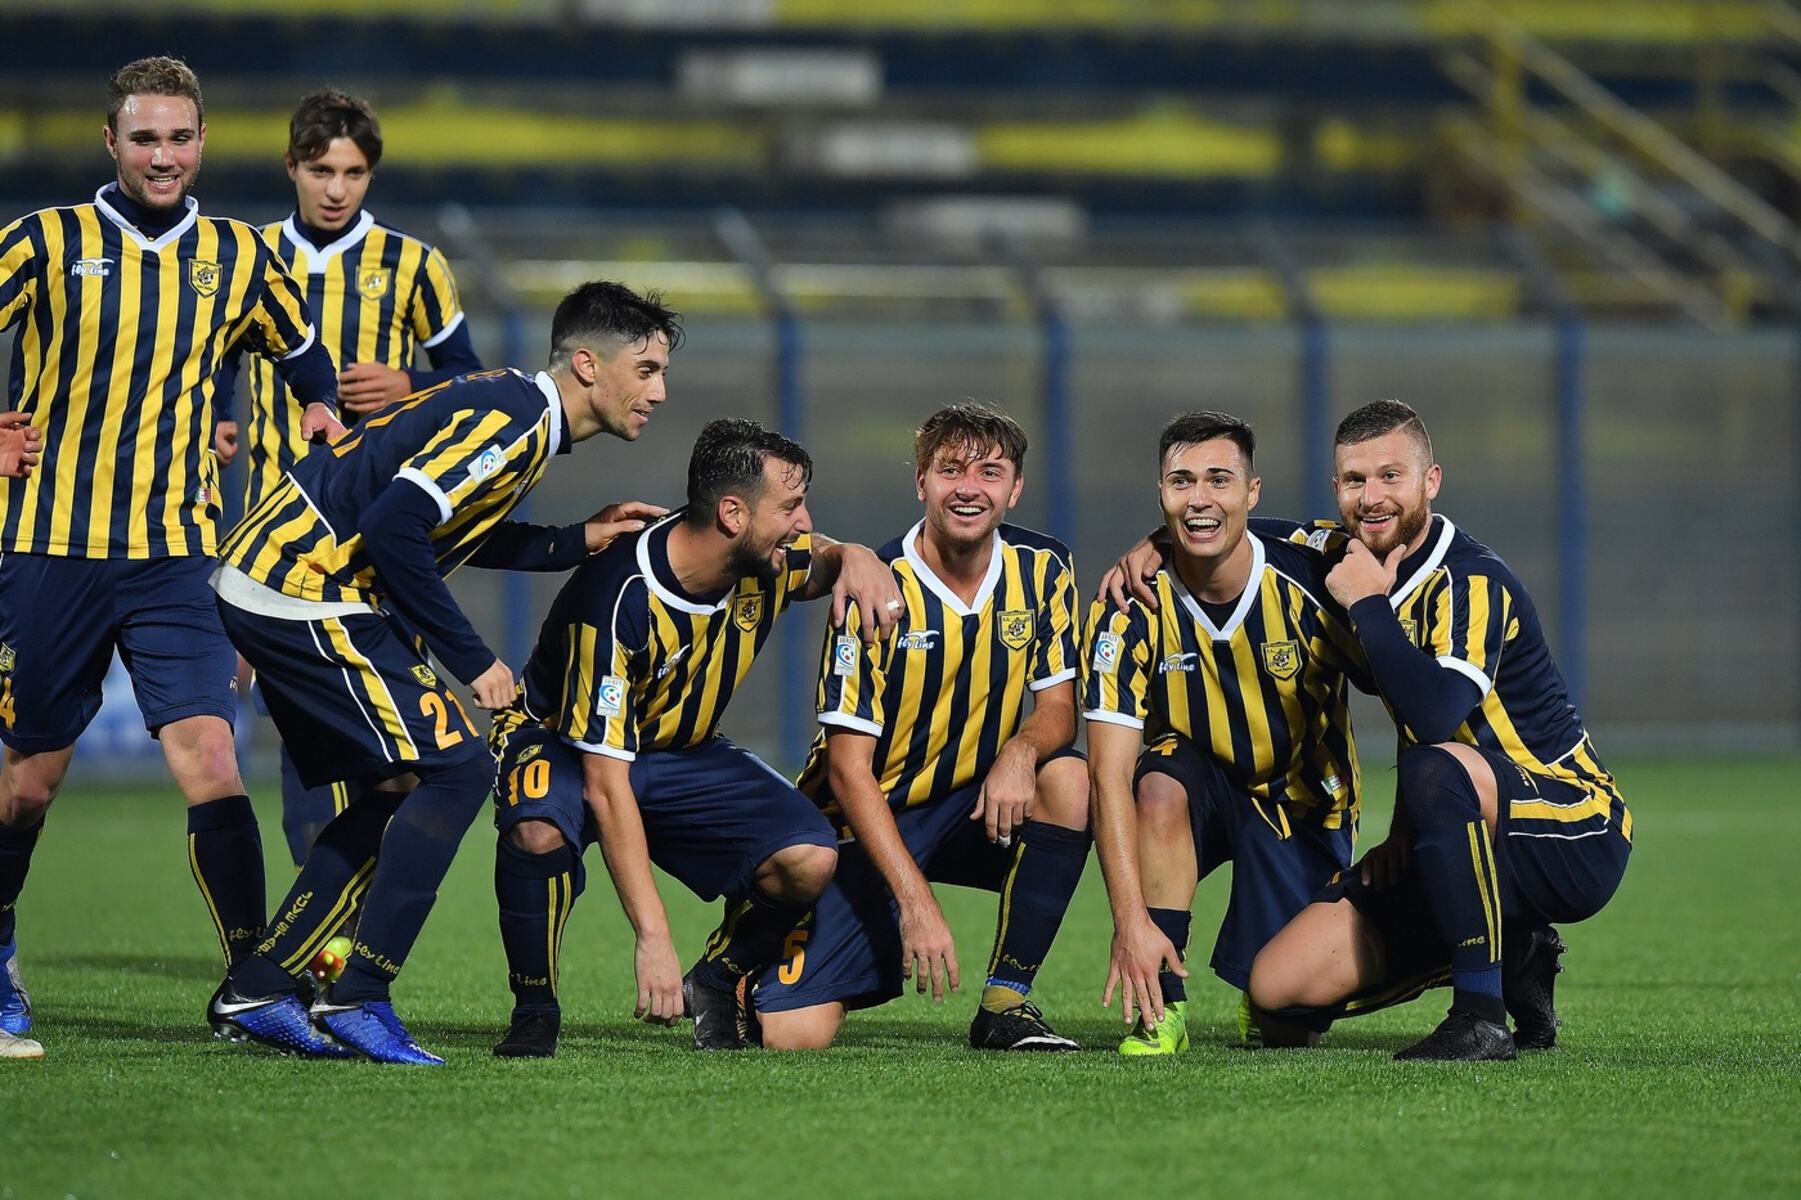 ss-juve-stabia-15-football-club-facts